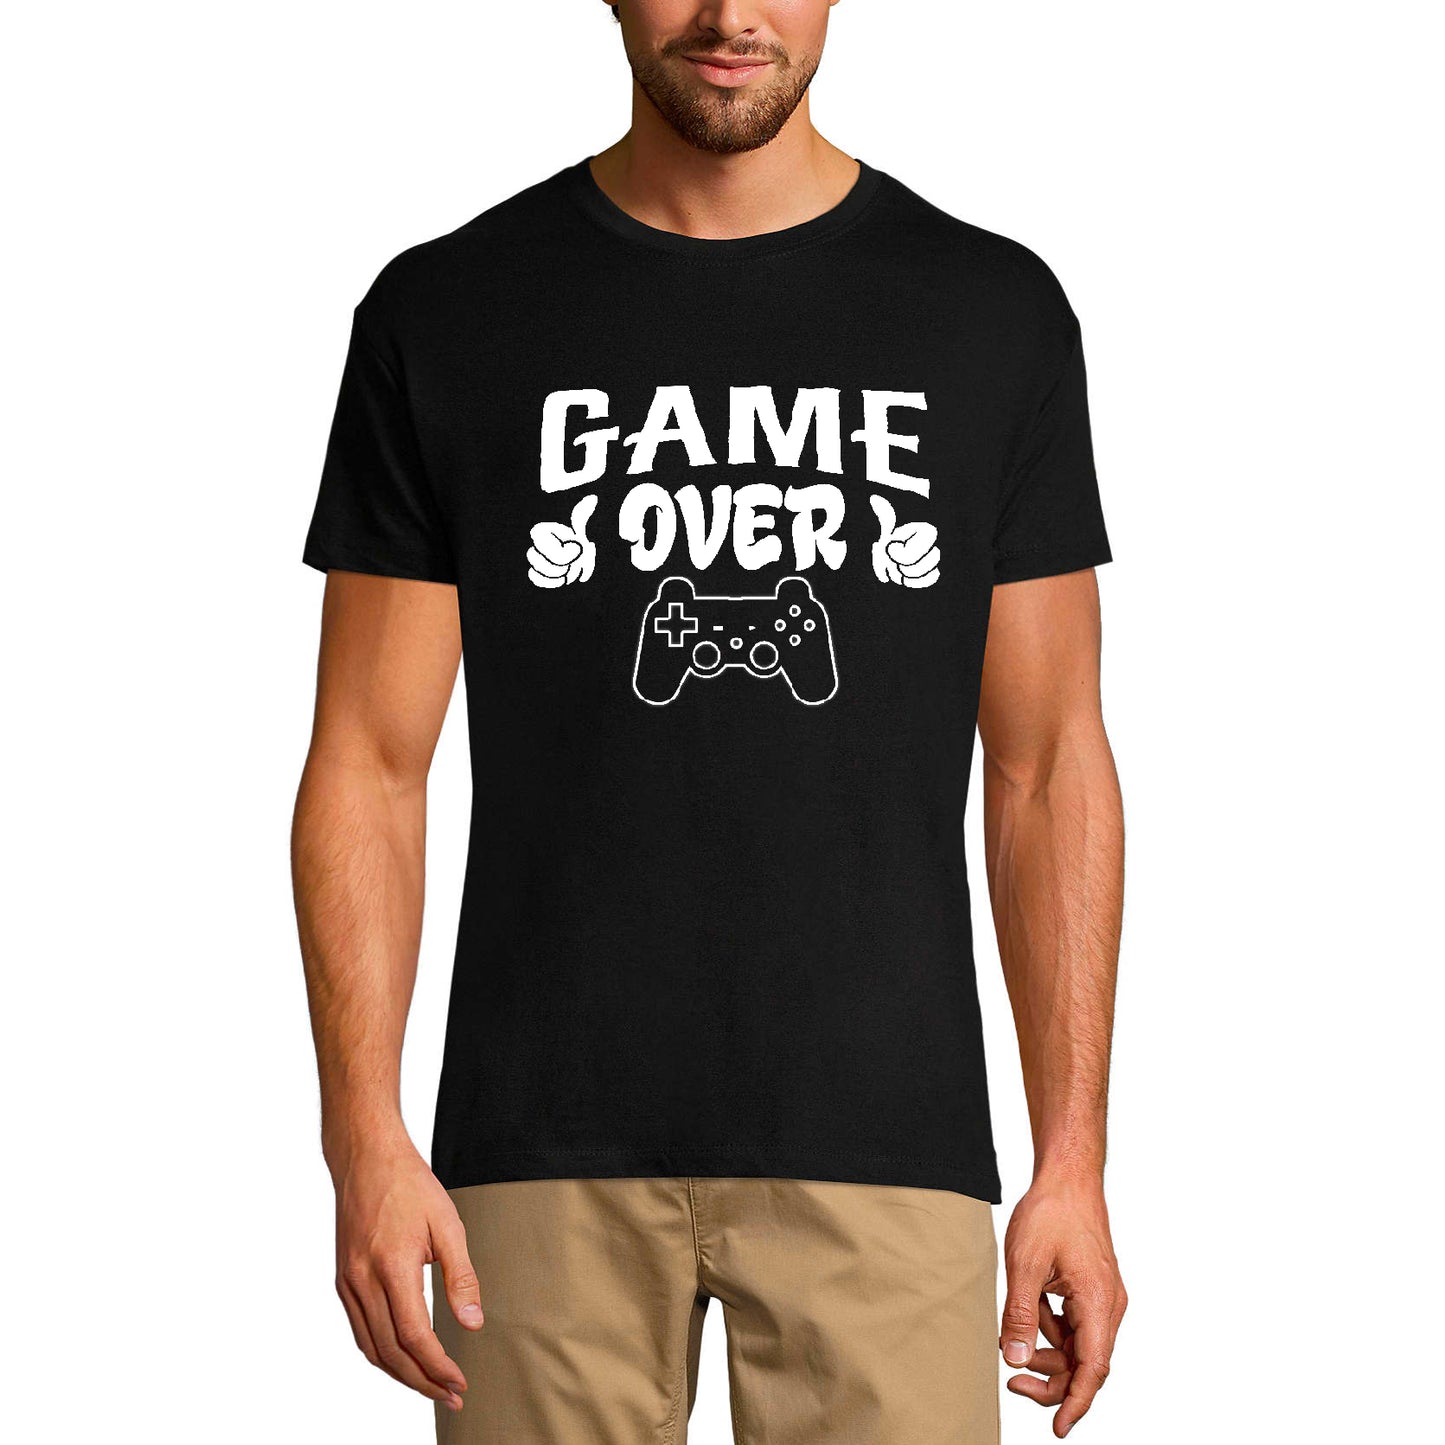 ULTRABASIC Men's Humor T-Shirt Game Over - End Game - Gamer Things - Casual Apparel game over dad awesome gamer i paused my game alien player ufo playstation tee shirt clothes gaming apparel gifts super mario nintendo call of duty bros graphic tshirt video game funny geek gift for the gamer fortnite pubg humor son father birthday